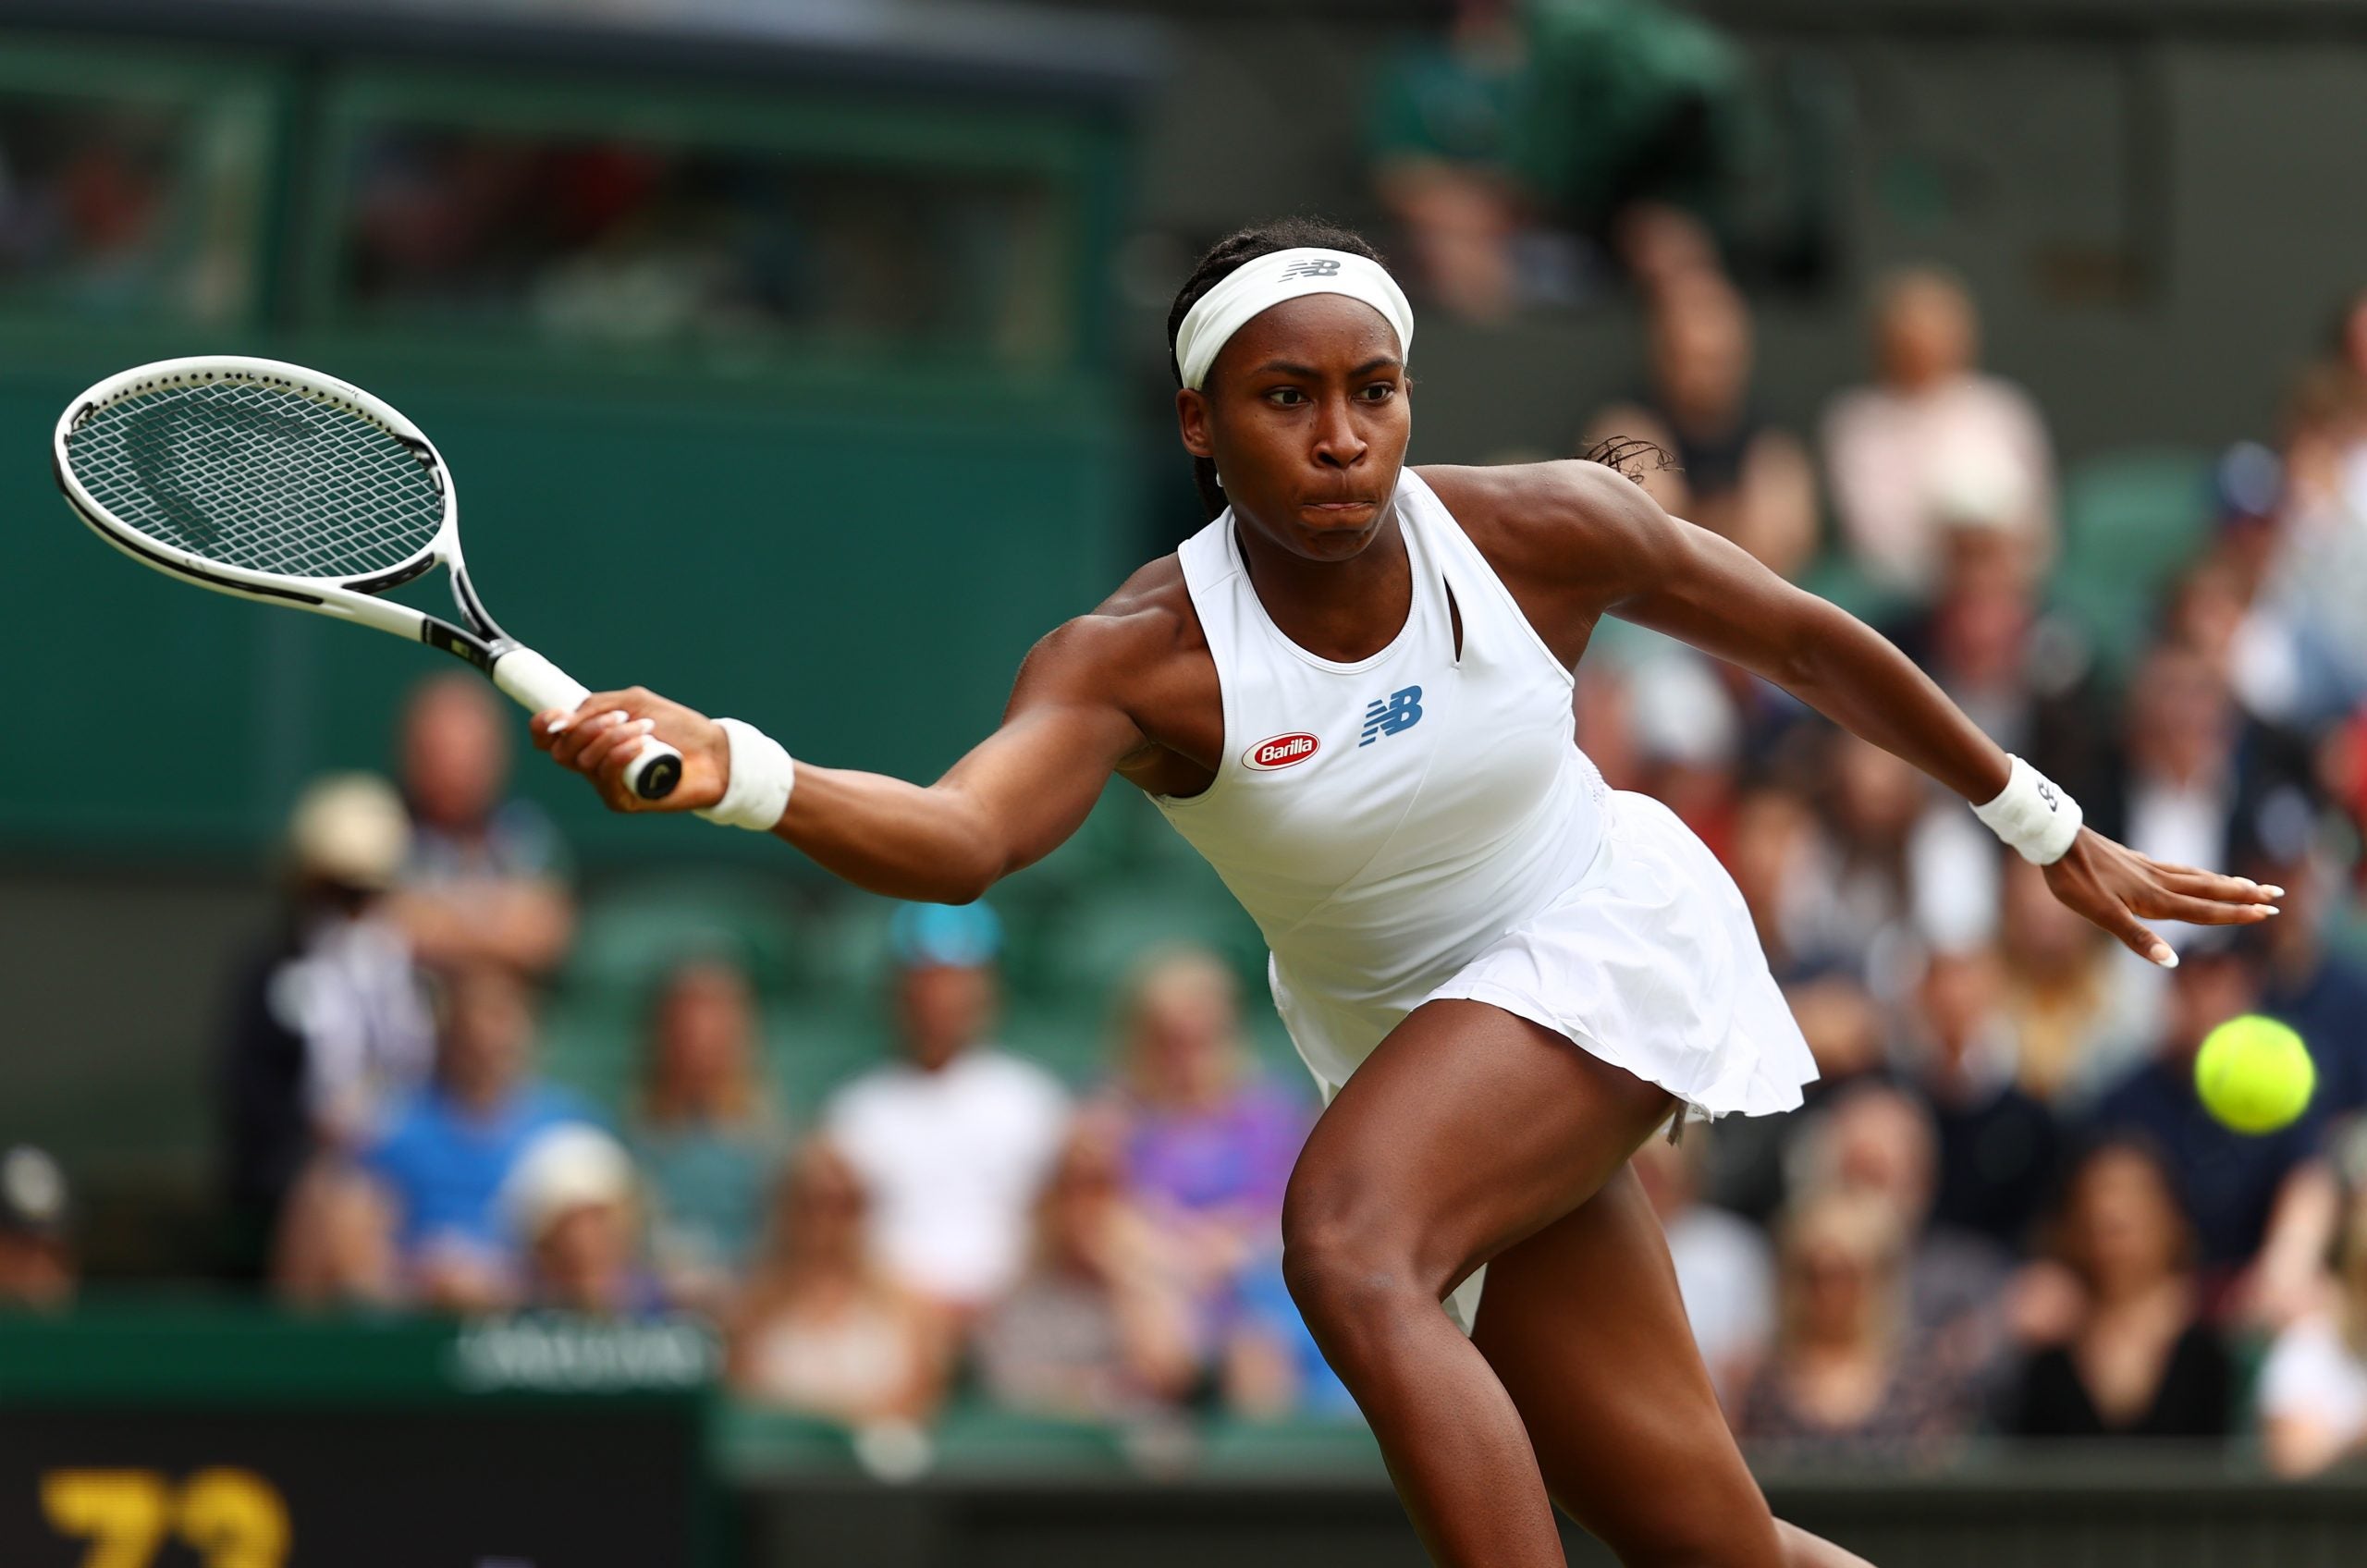 Tennis Player Coco Gauff Tests Positive For COVID-19, Will Not Attend Olympics